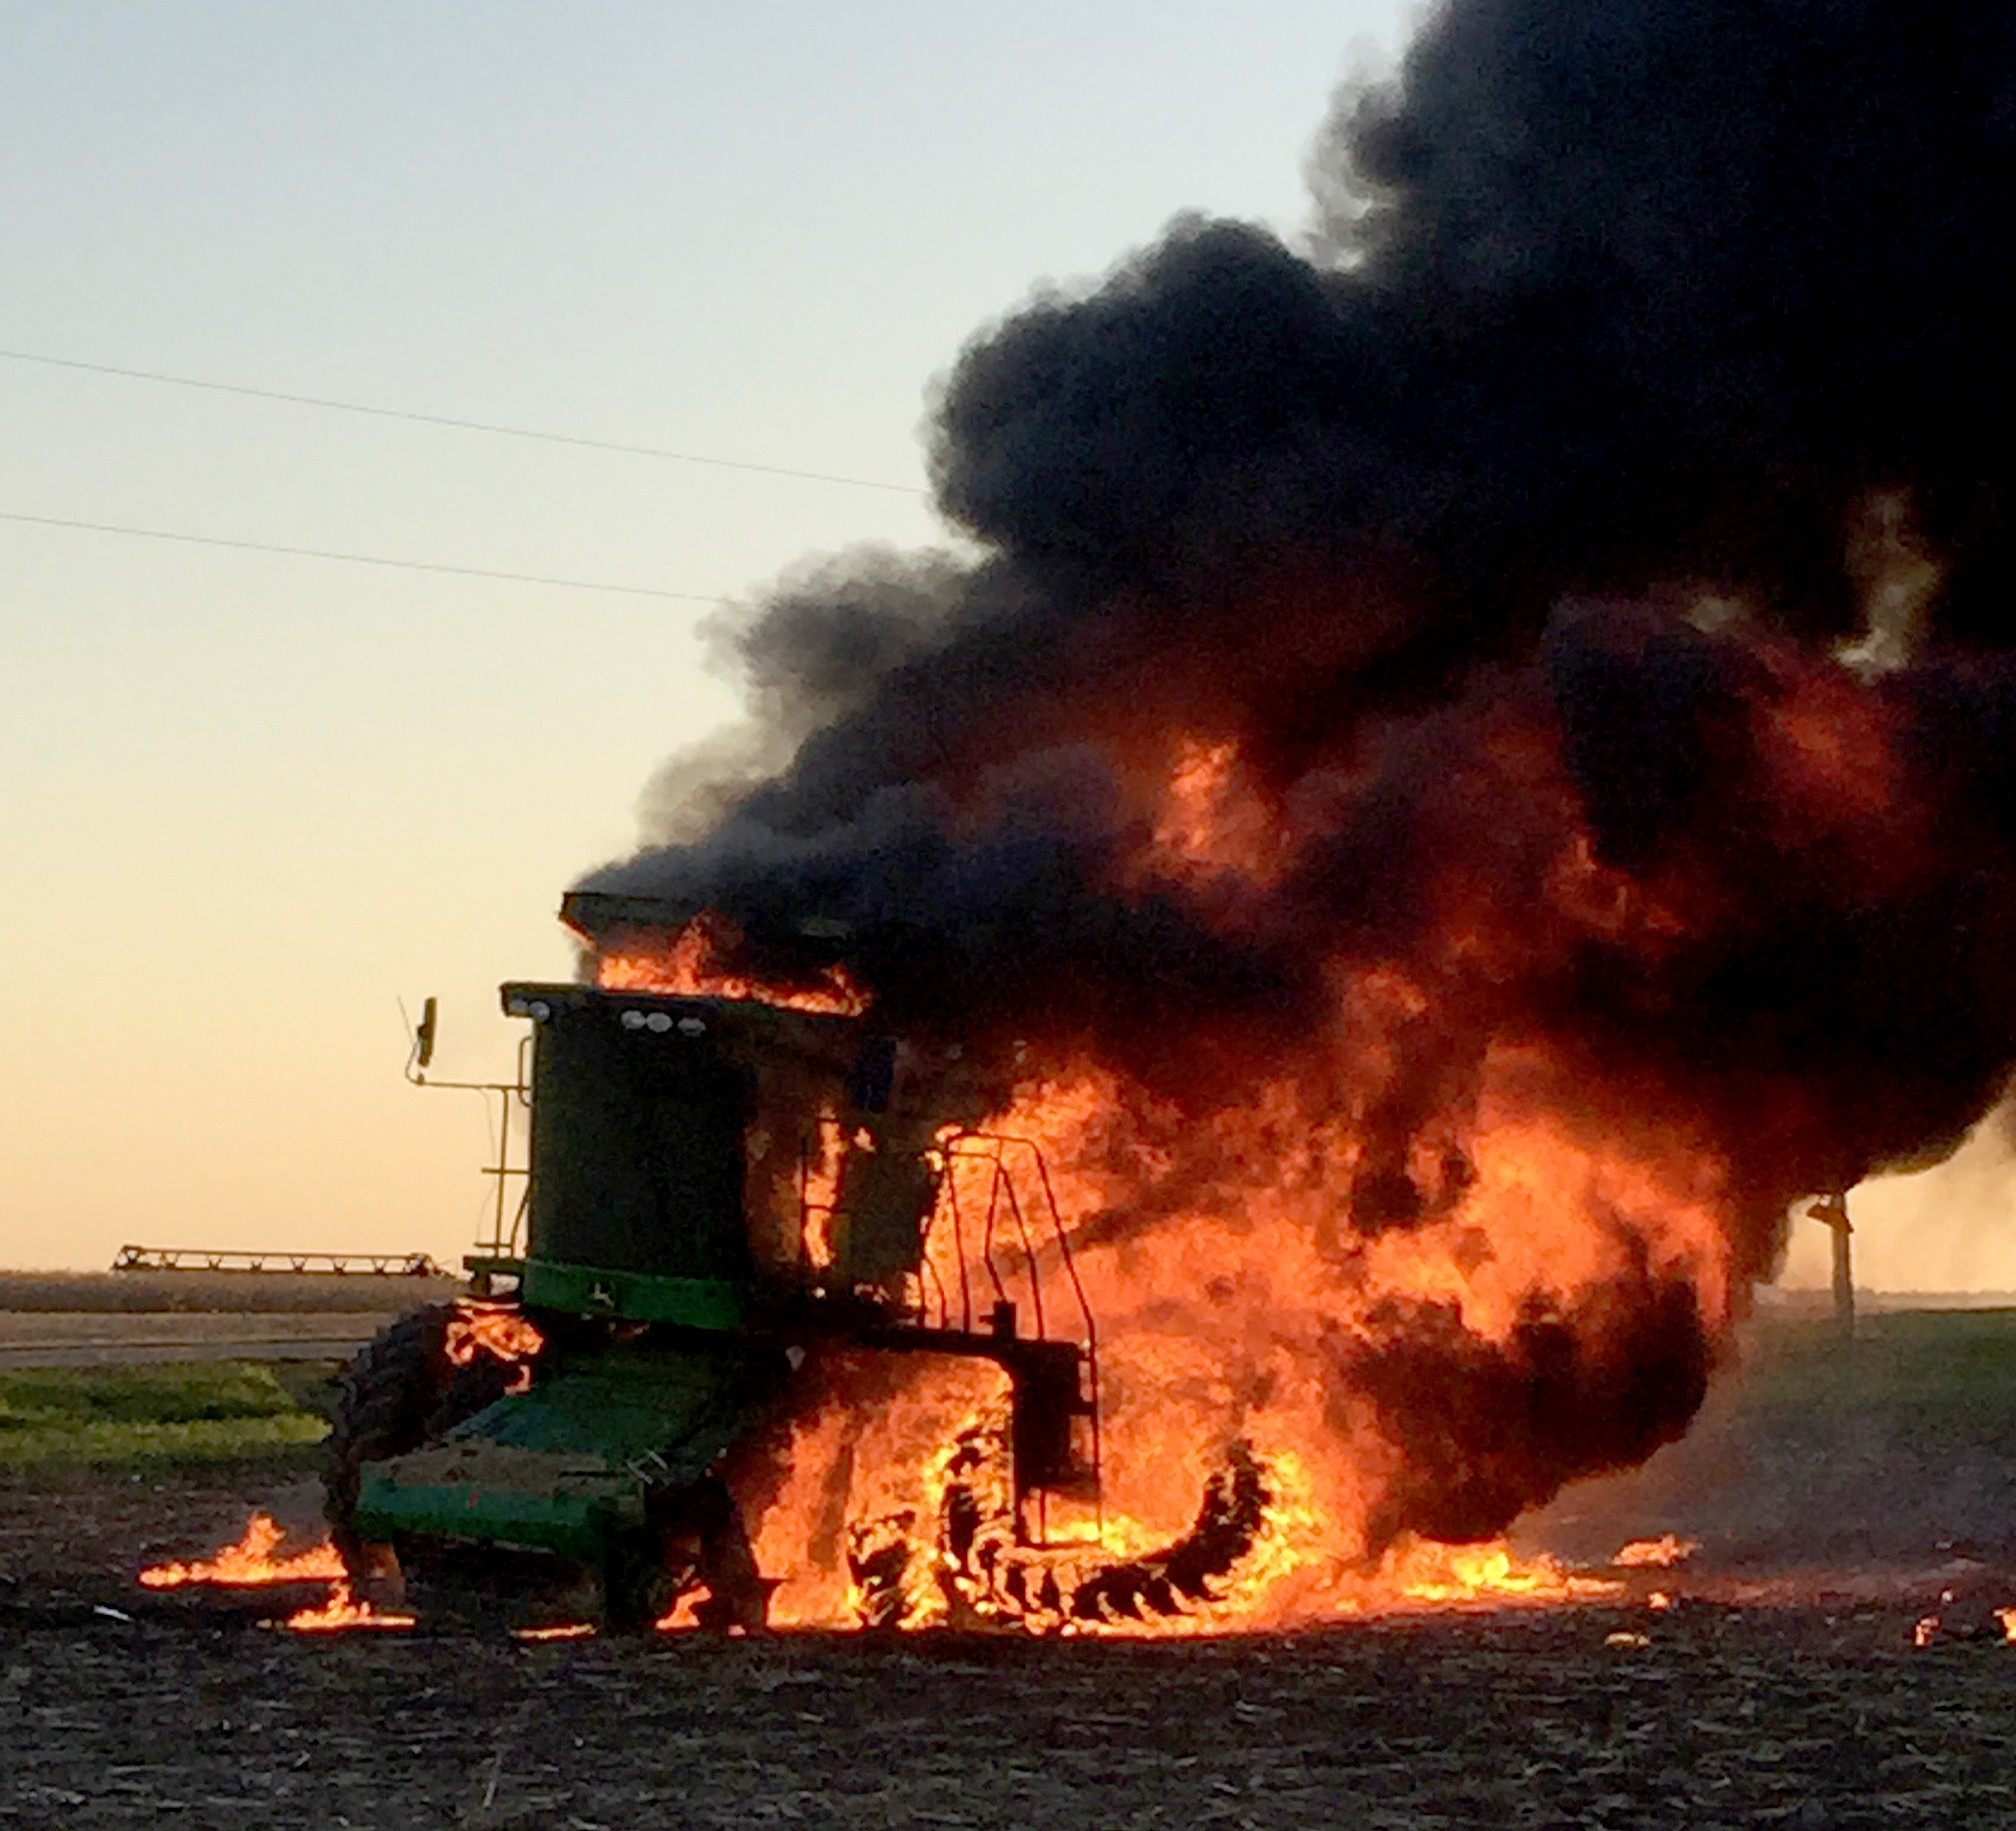 Warm, dry harvest conditions in combination with high winds increase the risk of combine fires. (Purdue University photo)